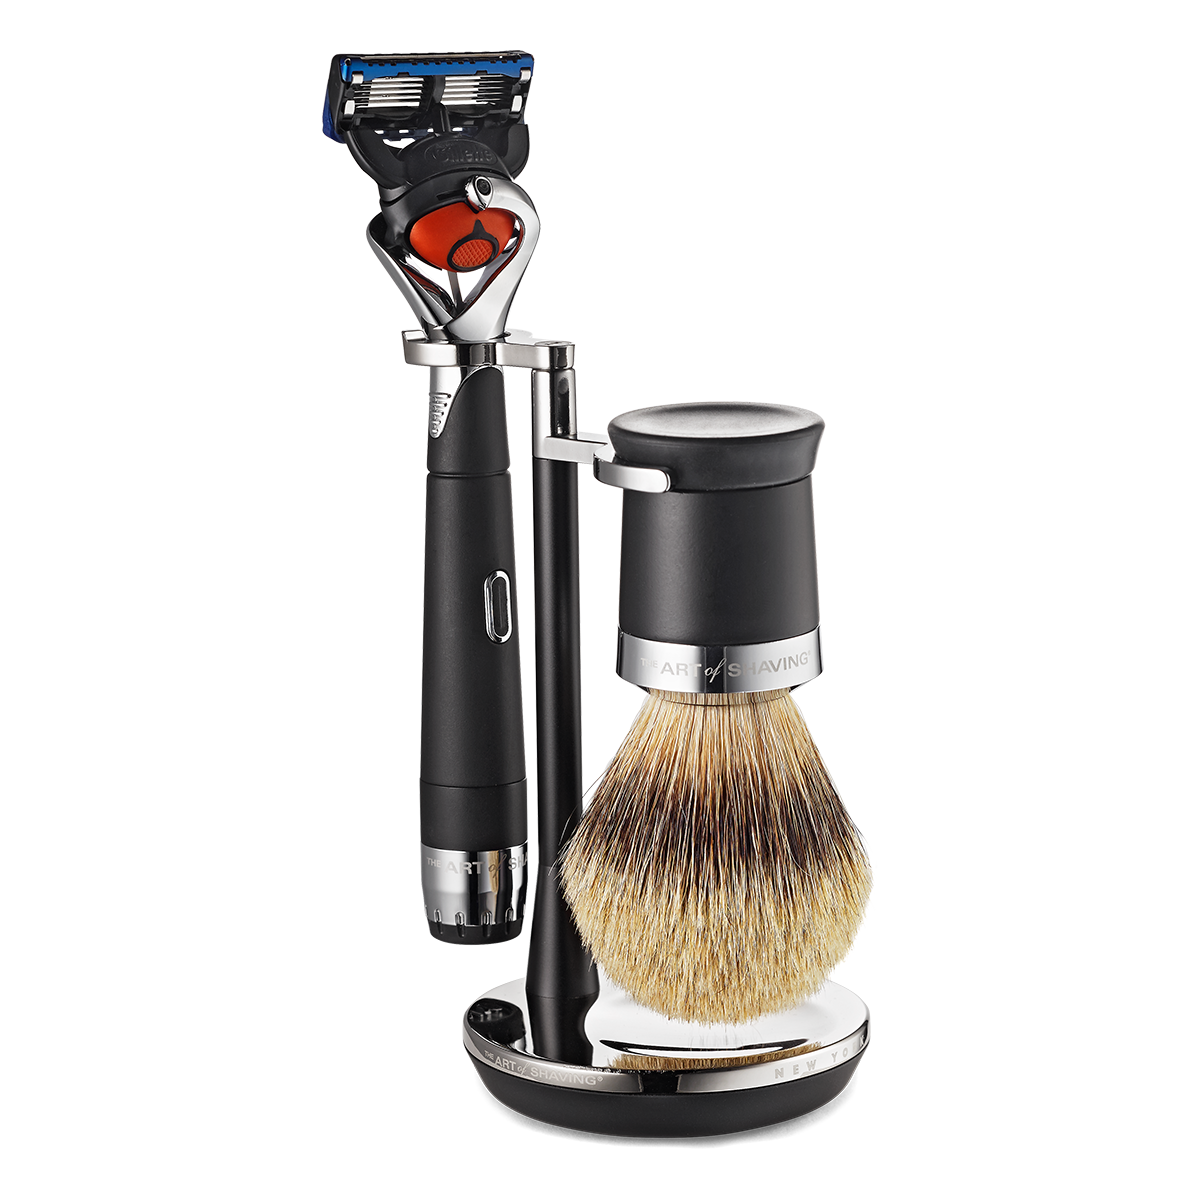 Lex Power Razor w Brush and Stand.png